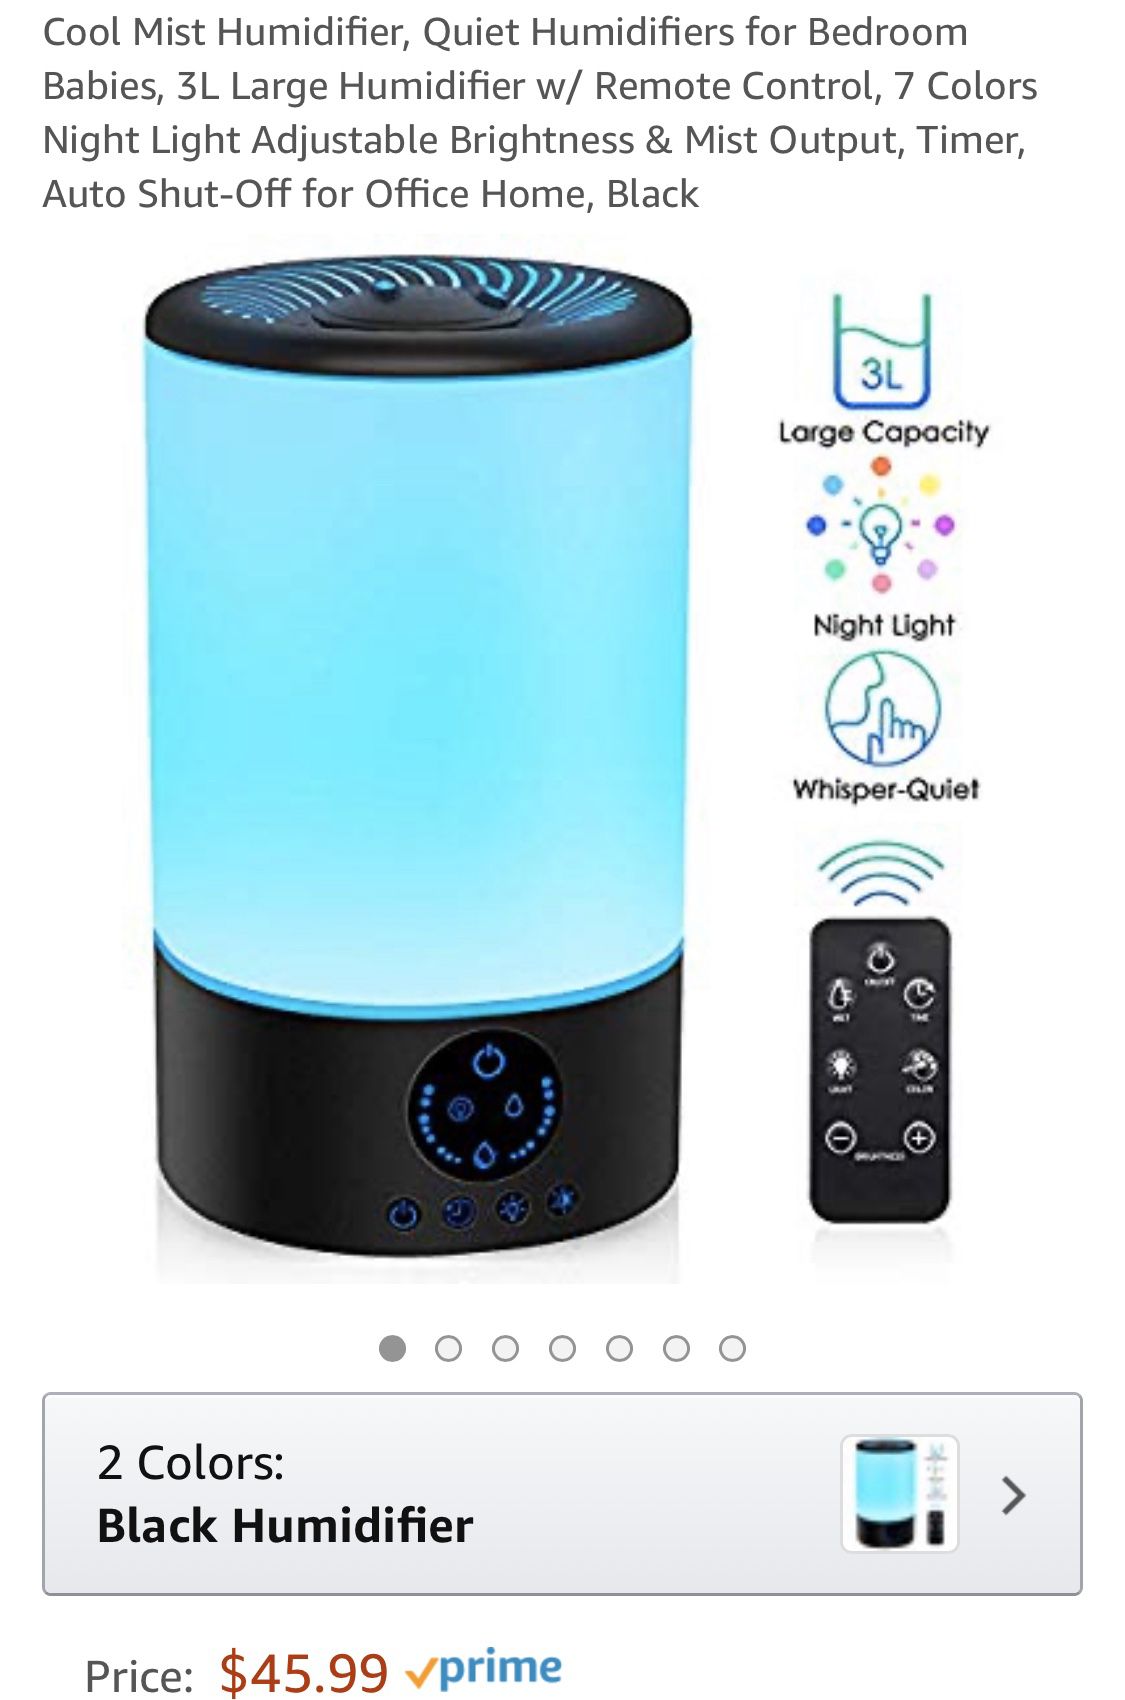 Cool mist humidifier with multicolored LED with remote